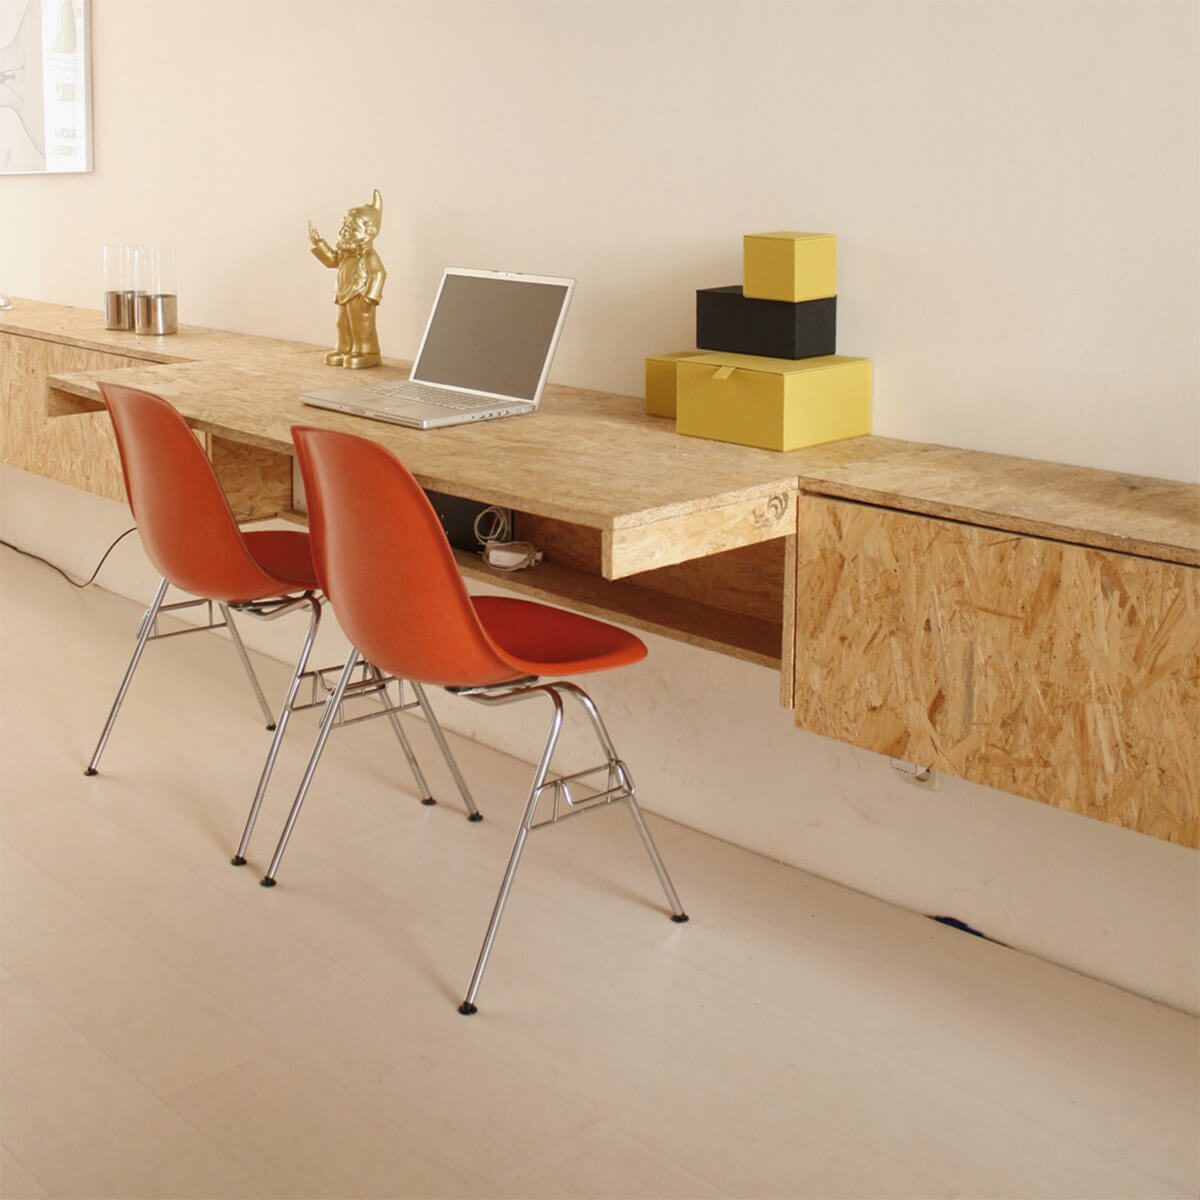 16 ways to get creative with plywood furniture — the family